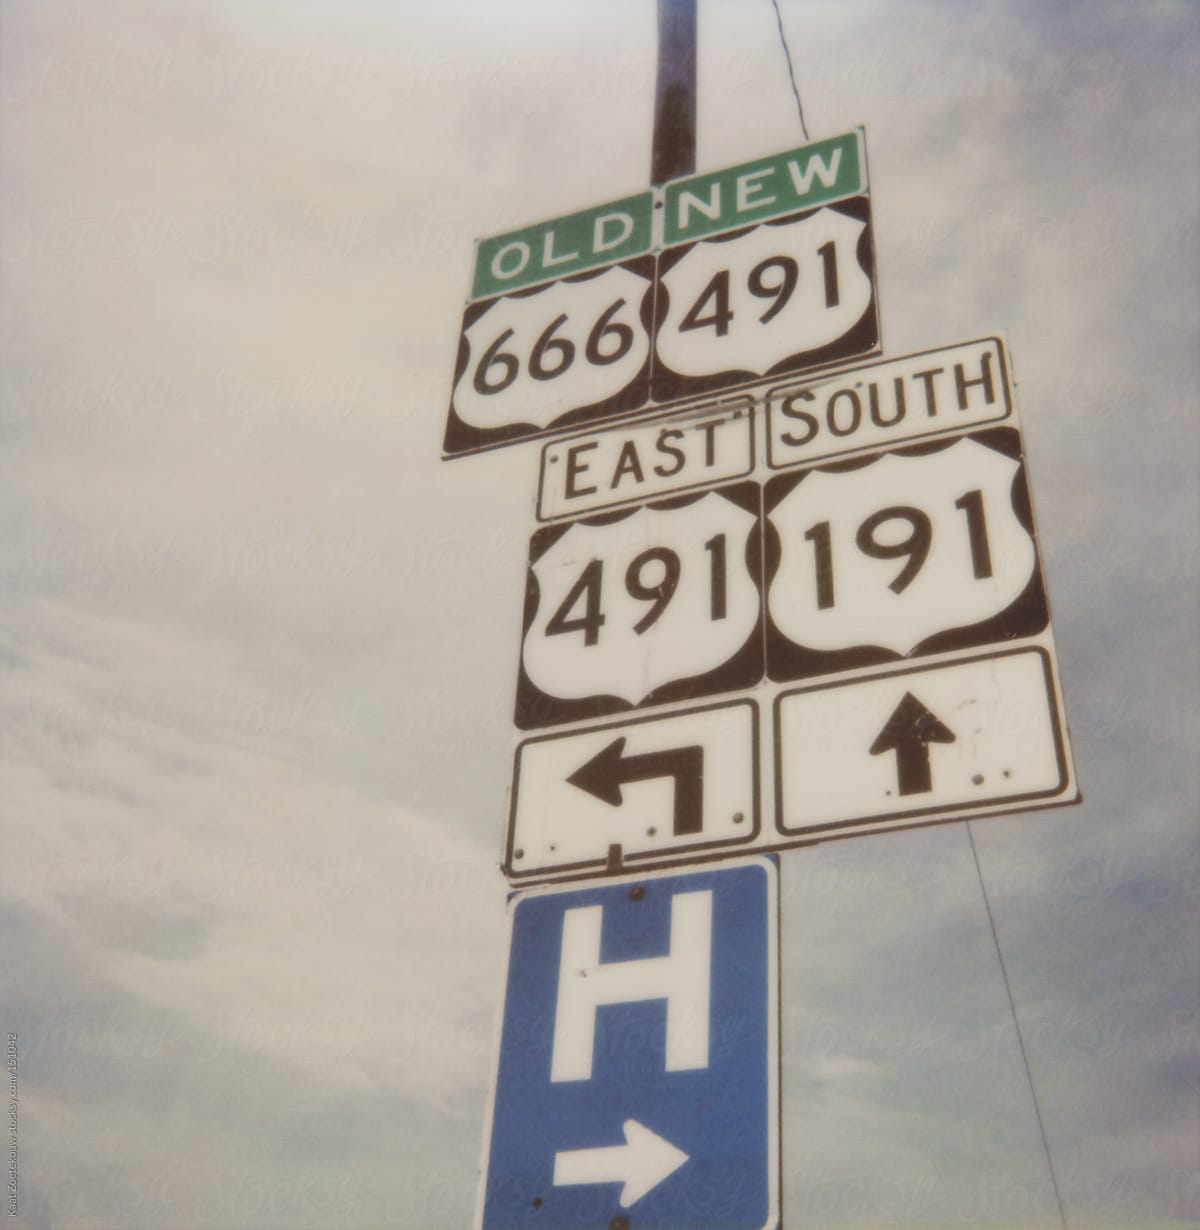 A frameless polaroid of traffic signs indicating a change in routename: route 666 is now route 491